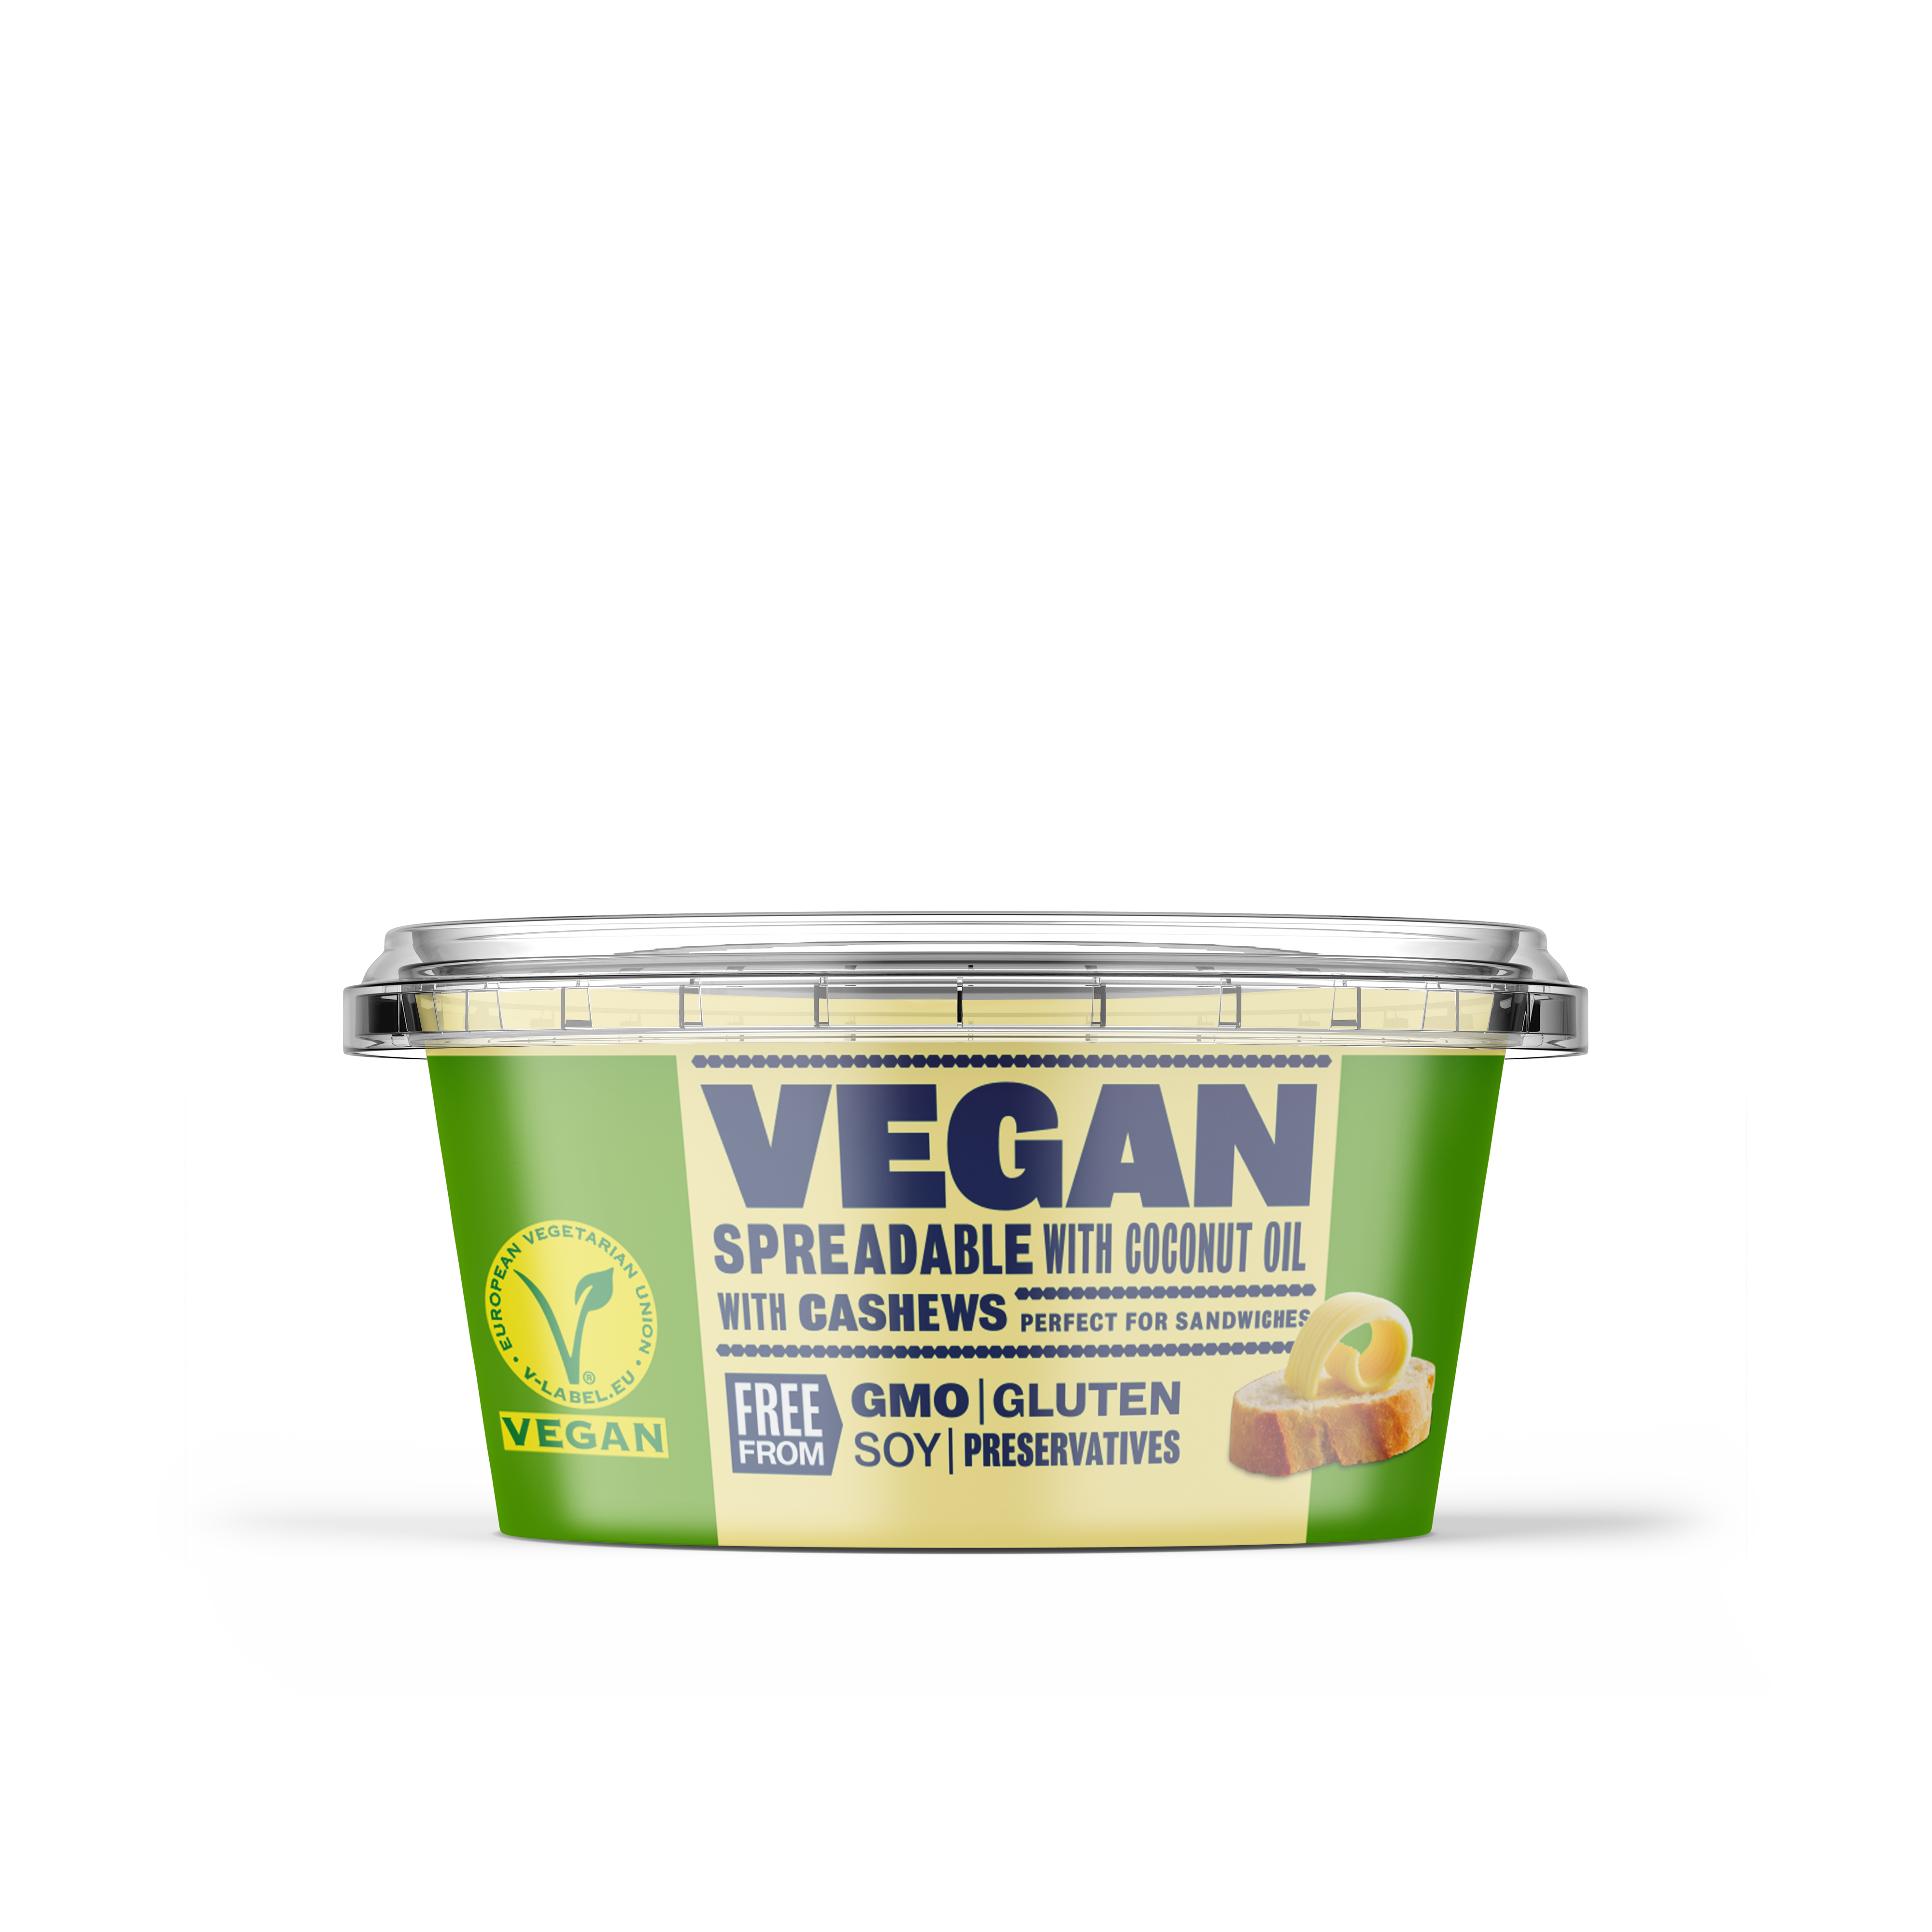 VEGANATION SPREADABLE VEGANATION for spreading 150g (with cashews)